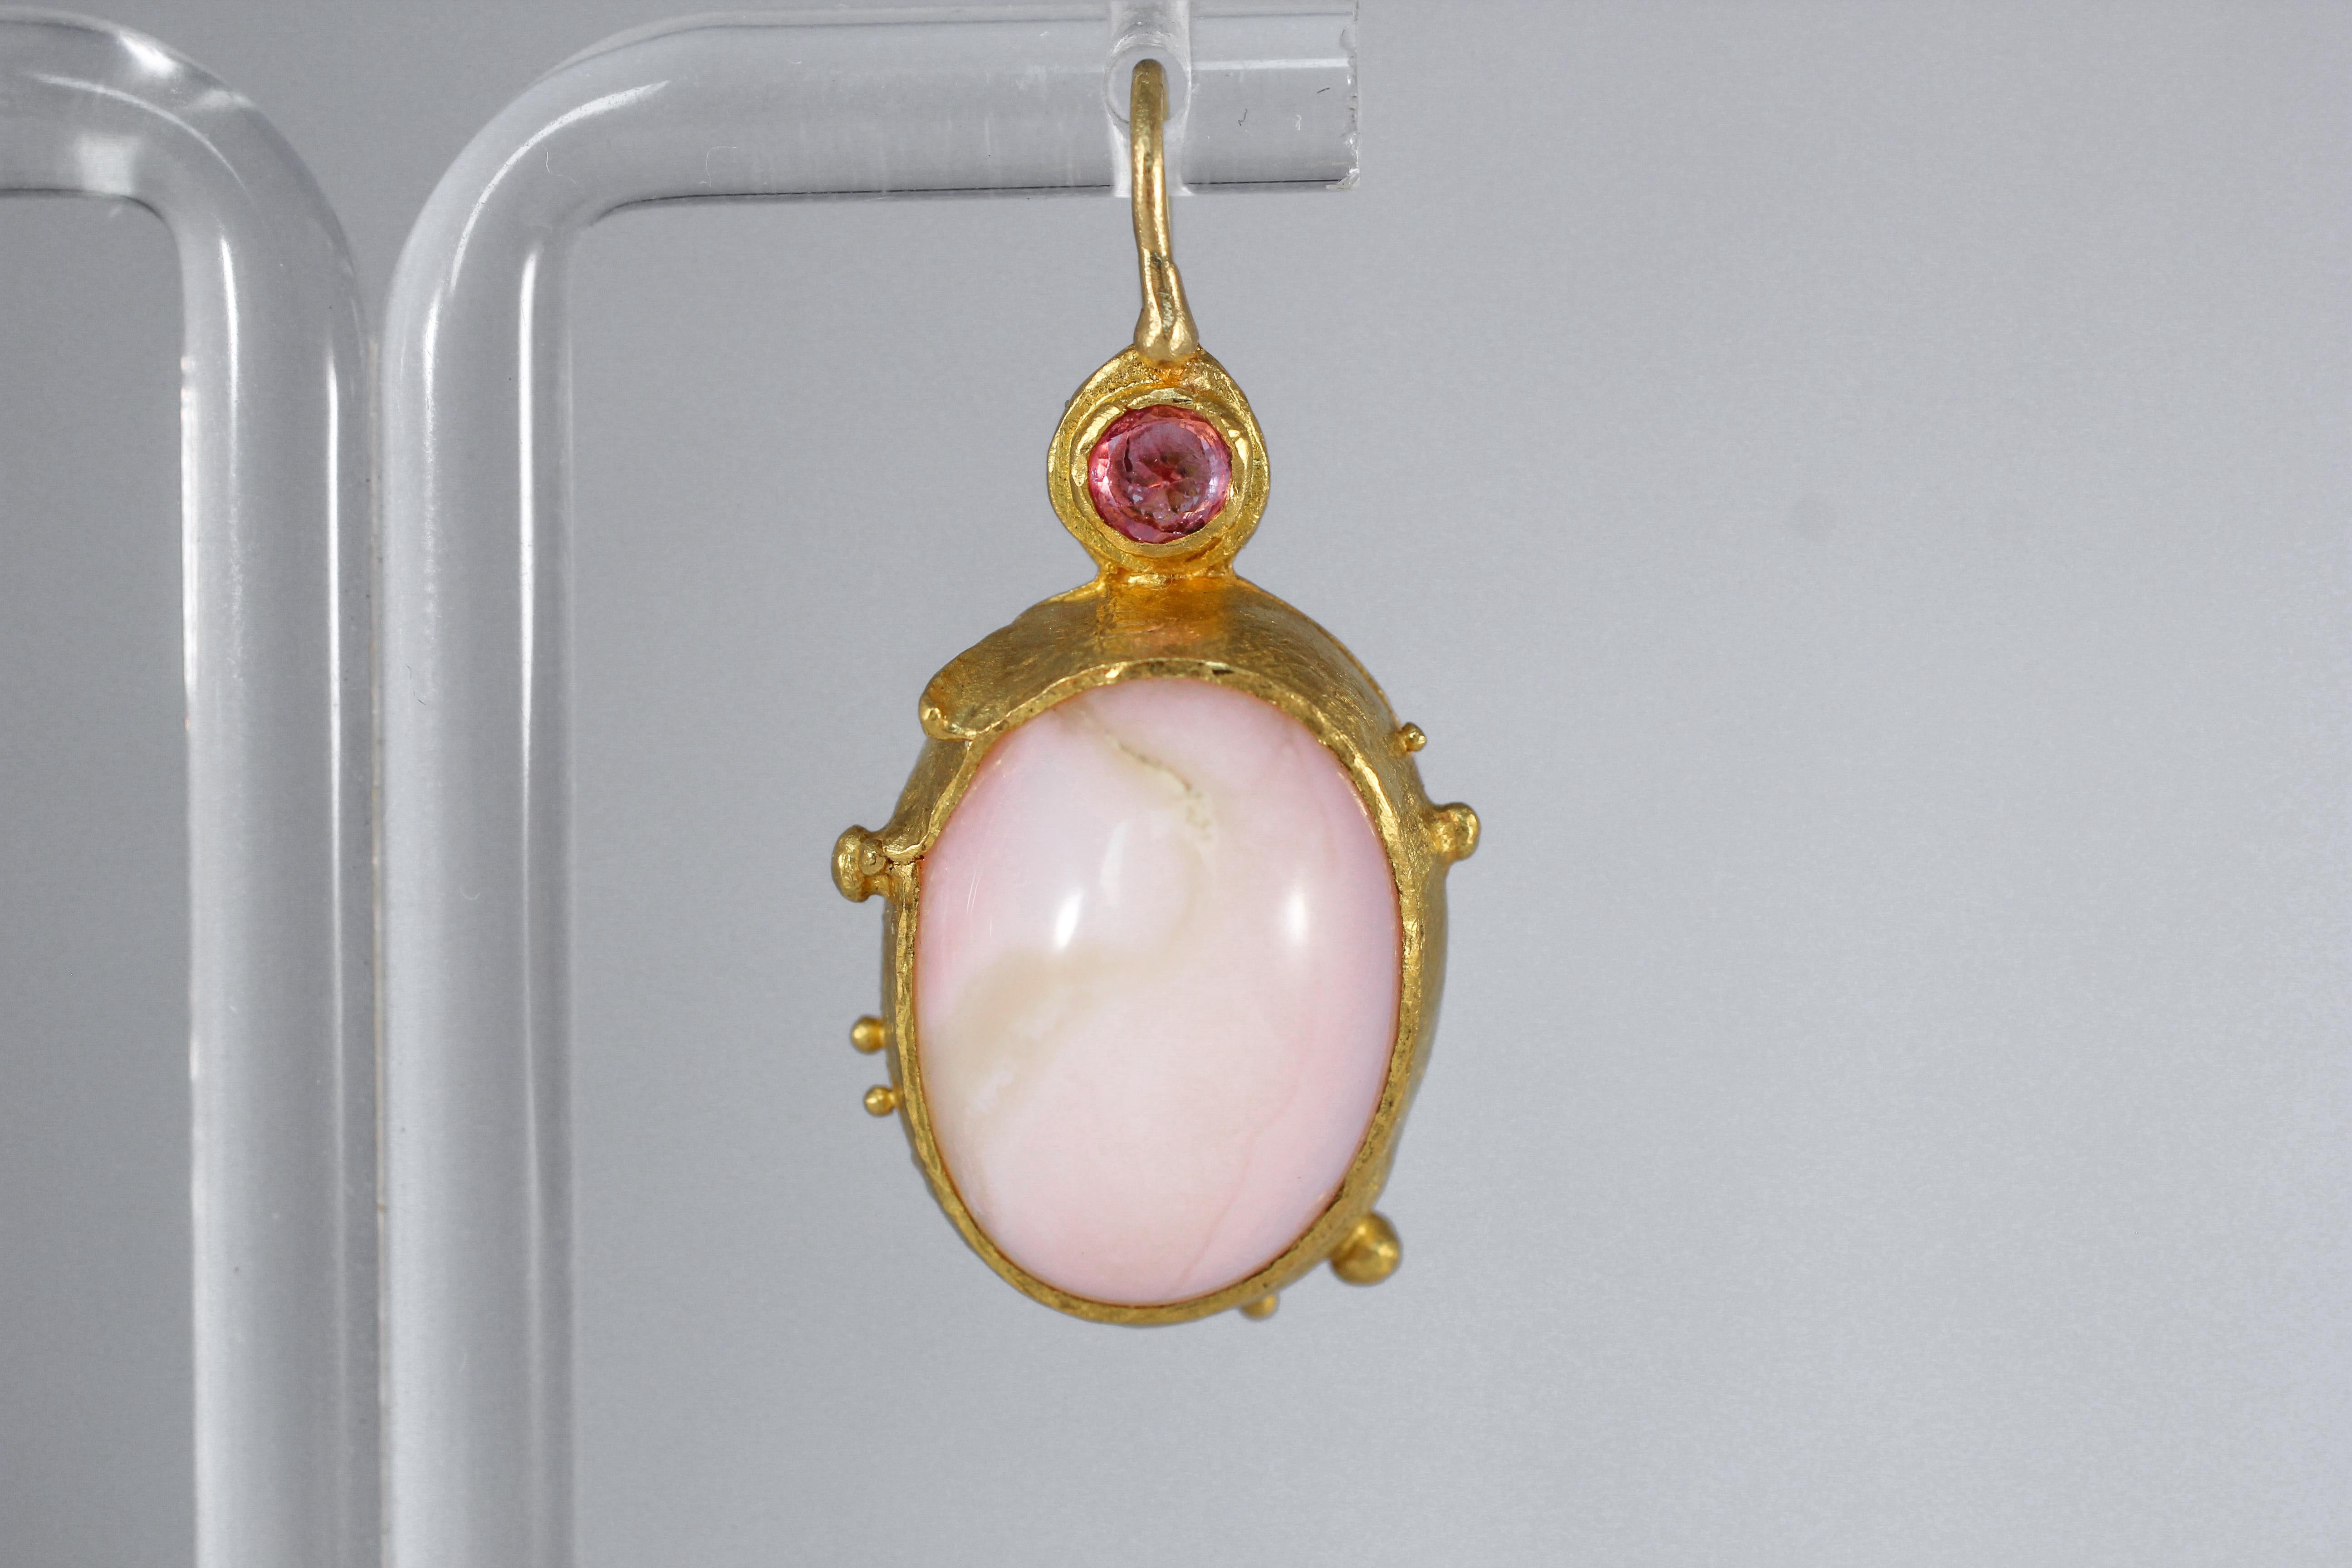 Rose earrings. These subtle pink color drop earrings will make an elegant addition to any outfit. They are comfortable and are easy to coordinate with any outfit.

The inspiration for these earrings comes from interpretive traditions of Modernist